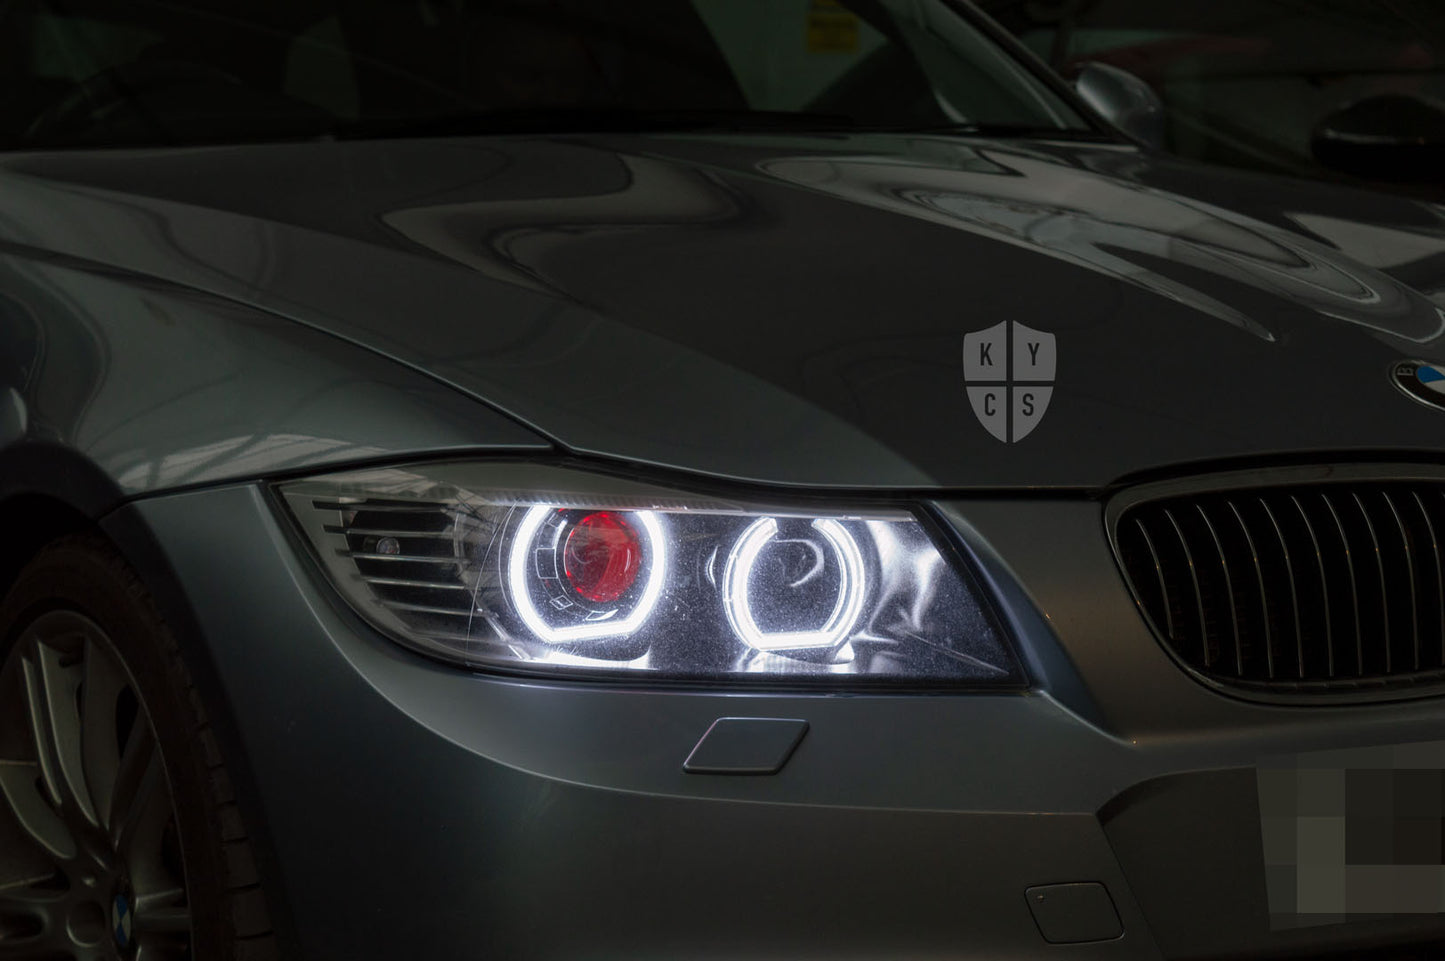 Headlight options on the above vehicle: KYCS (white) angel eyes | Classic blackout | Bi-LED 2.5" projector with LED bulb | Red demon eye | Move high beam to low beam bi-LED projector | LED indicators